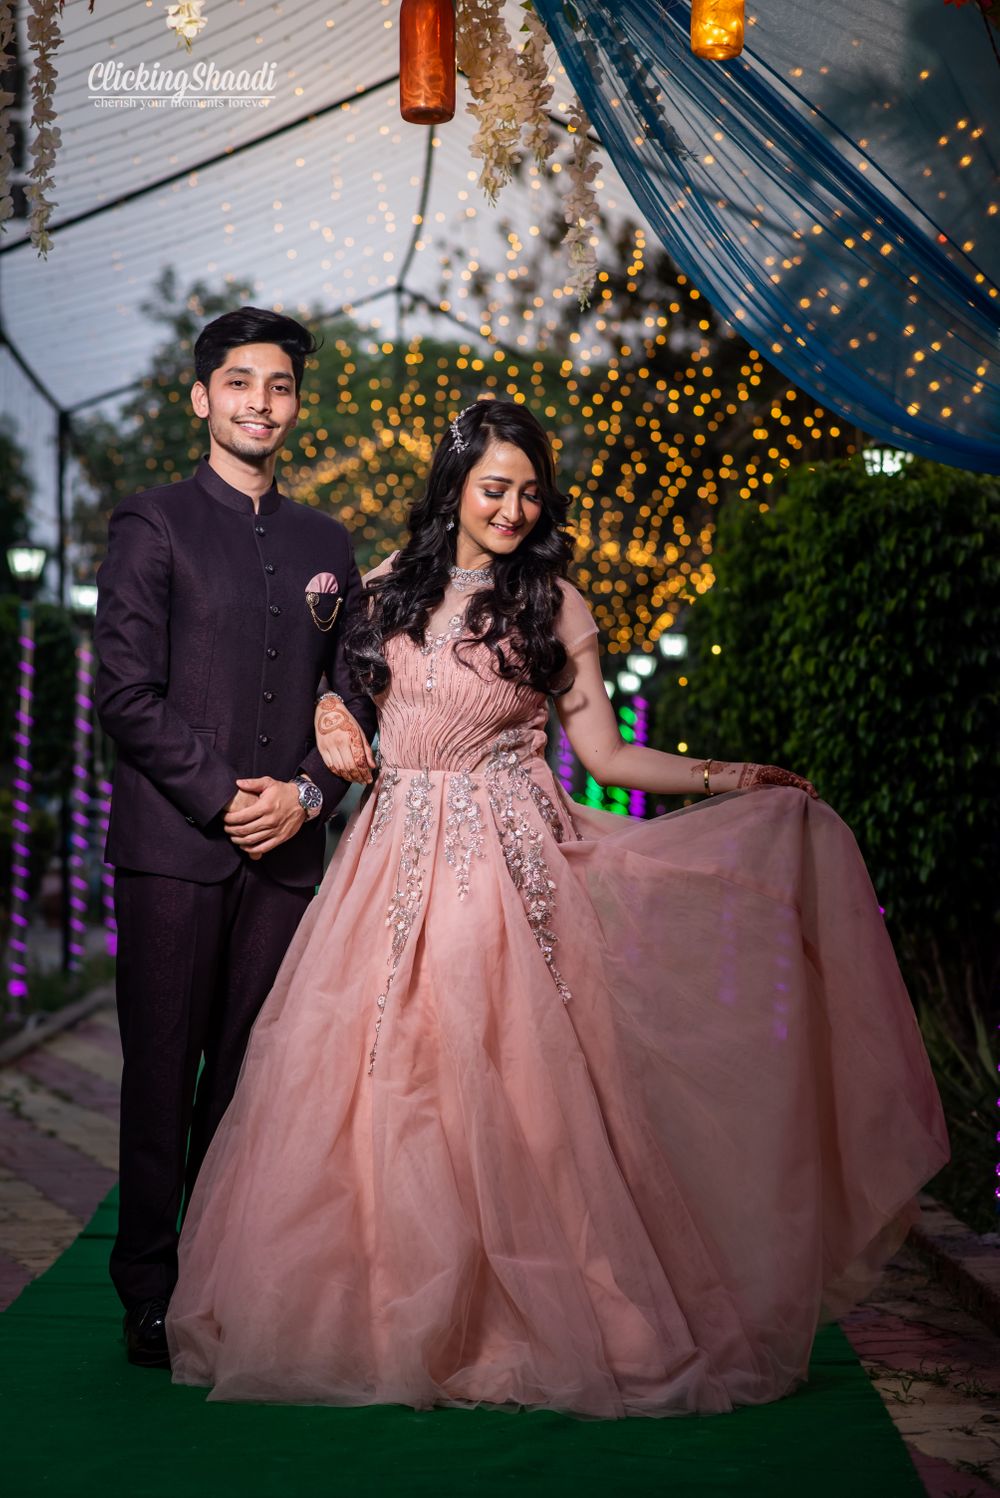 Photo From S R I T U - By Clicking Shaadi